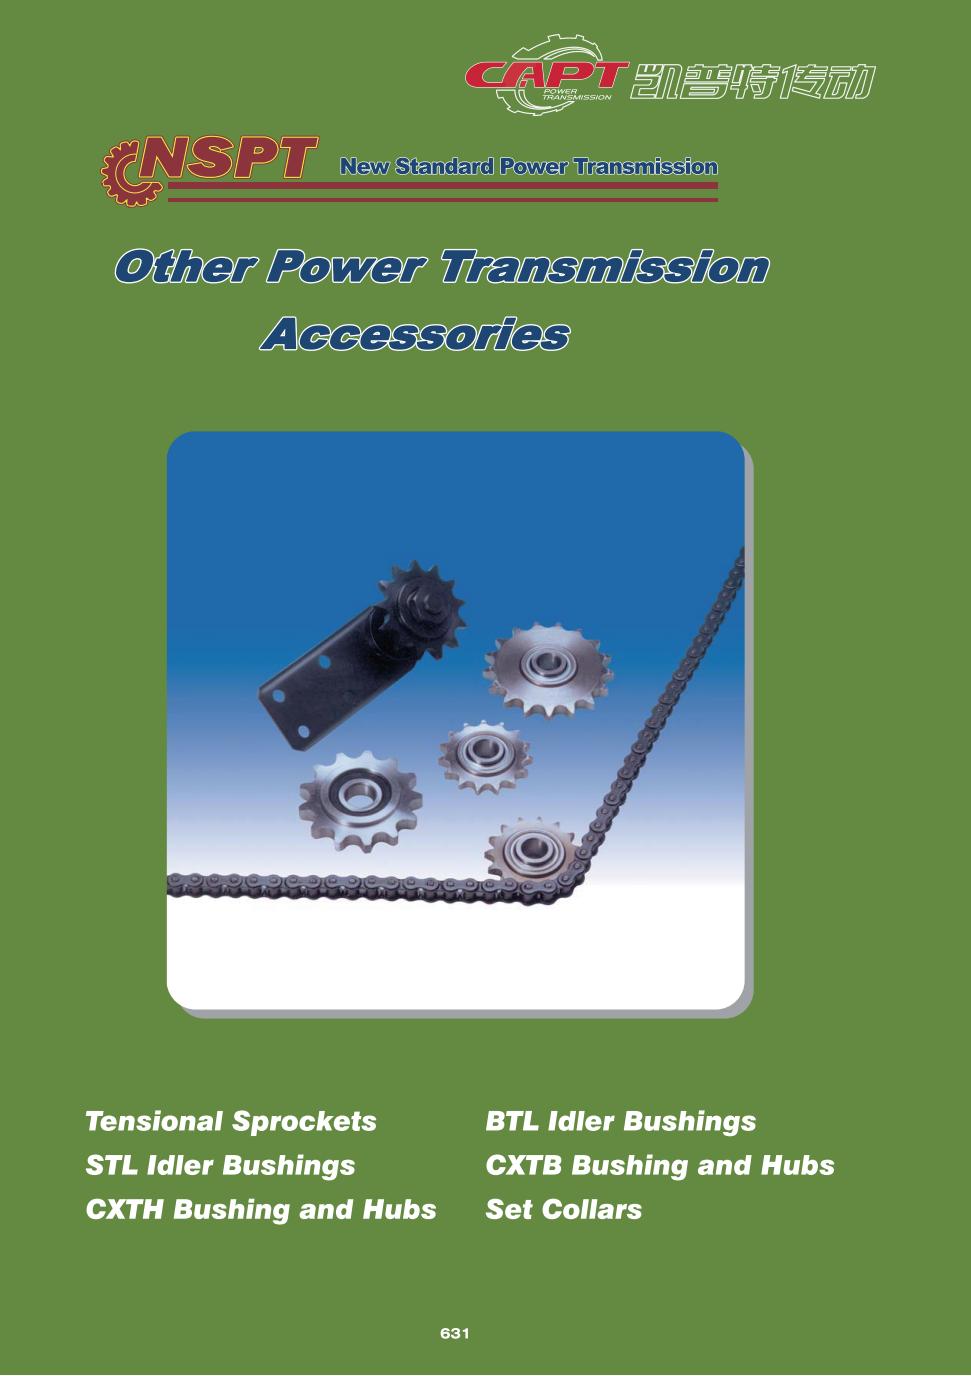 15-Other Power Transmission